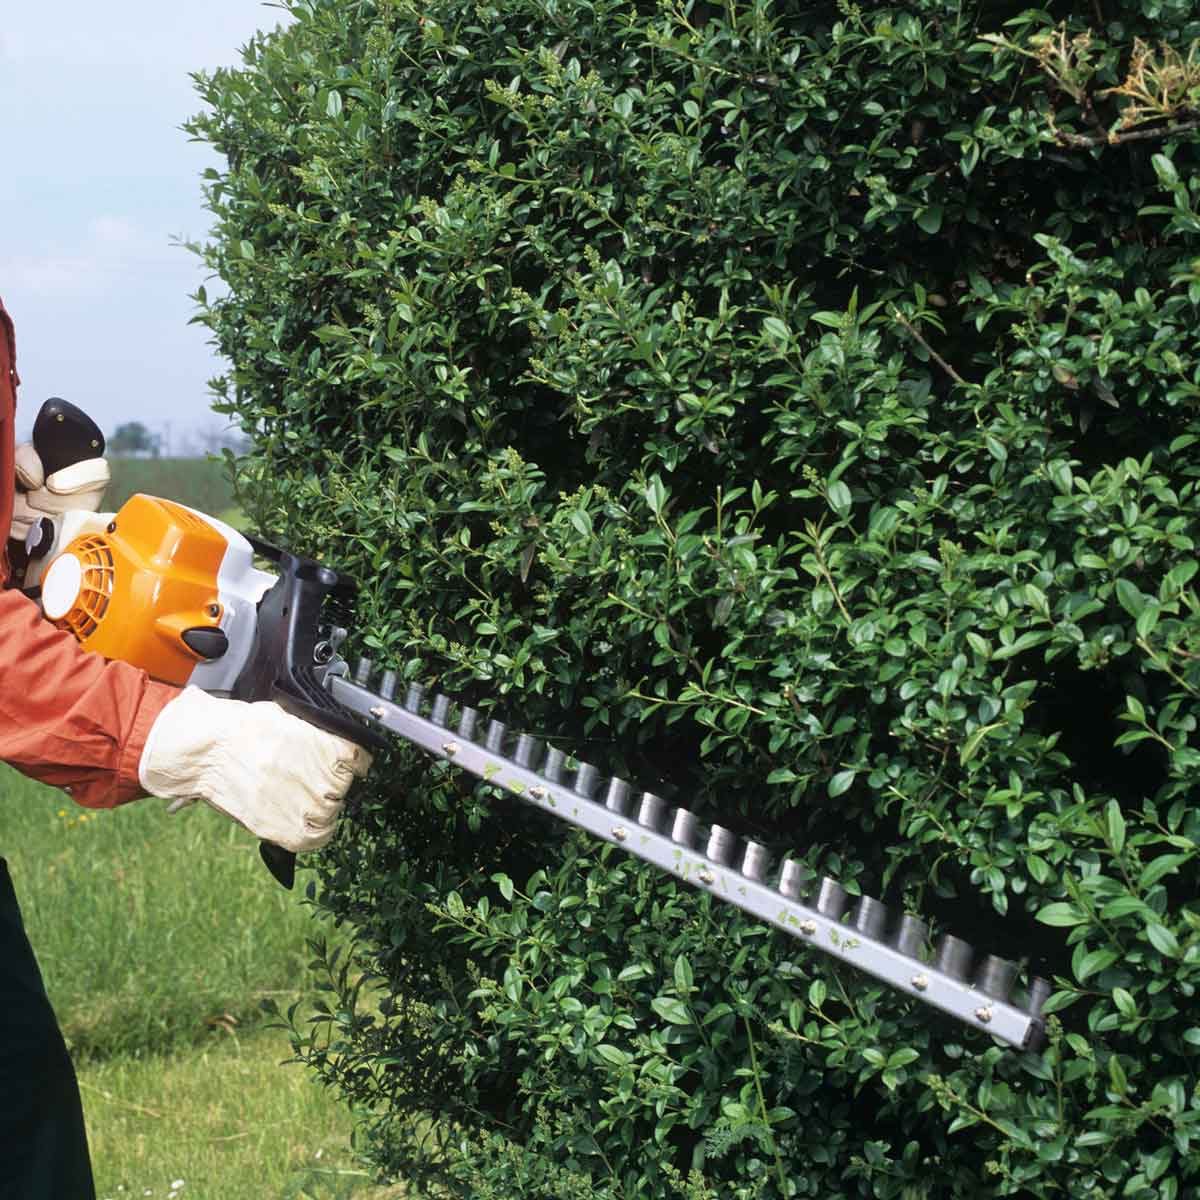 Trimming Hedges